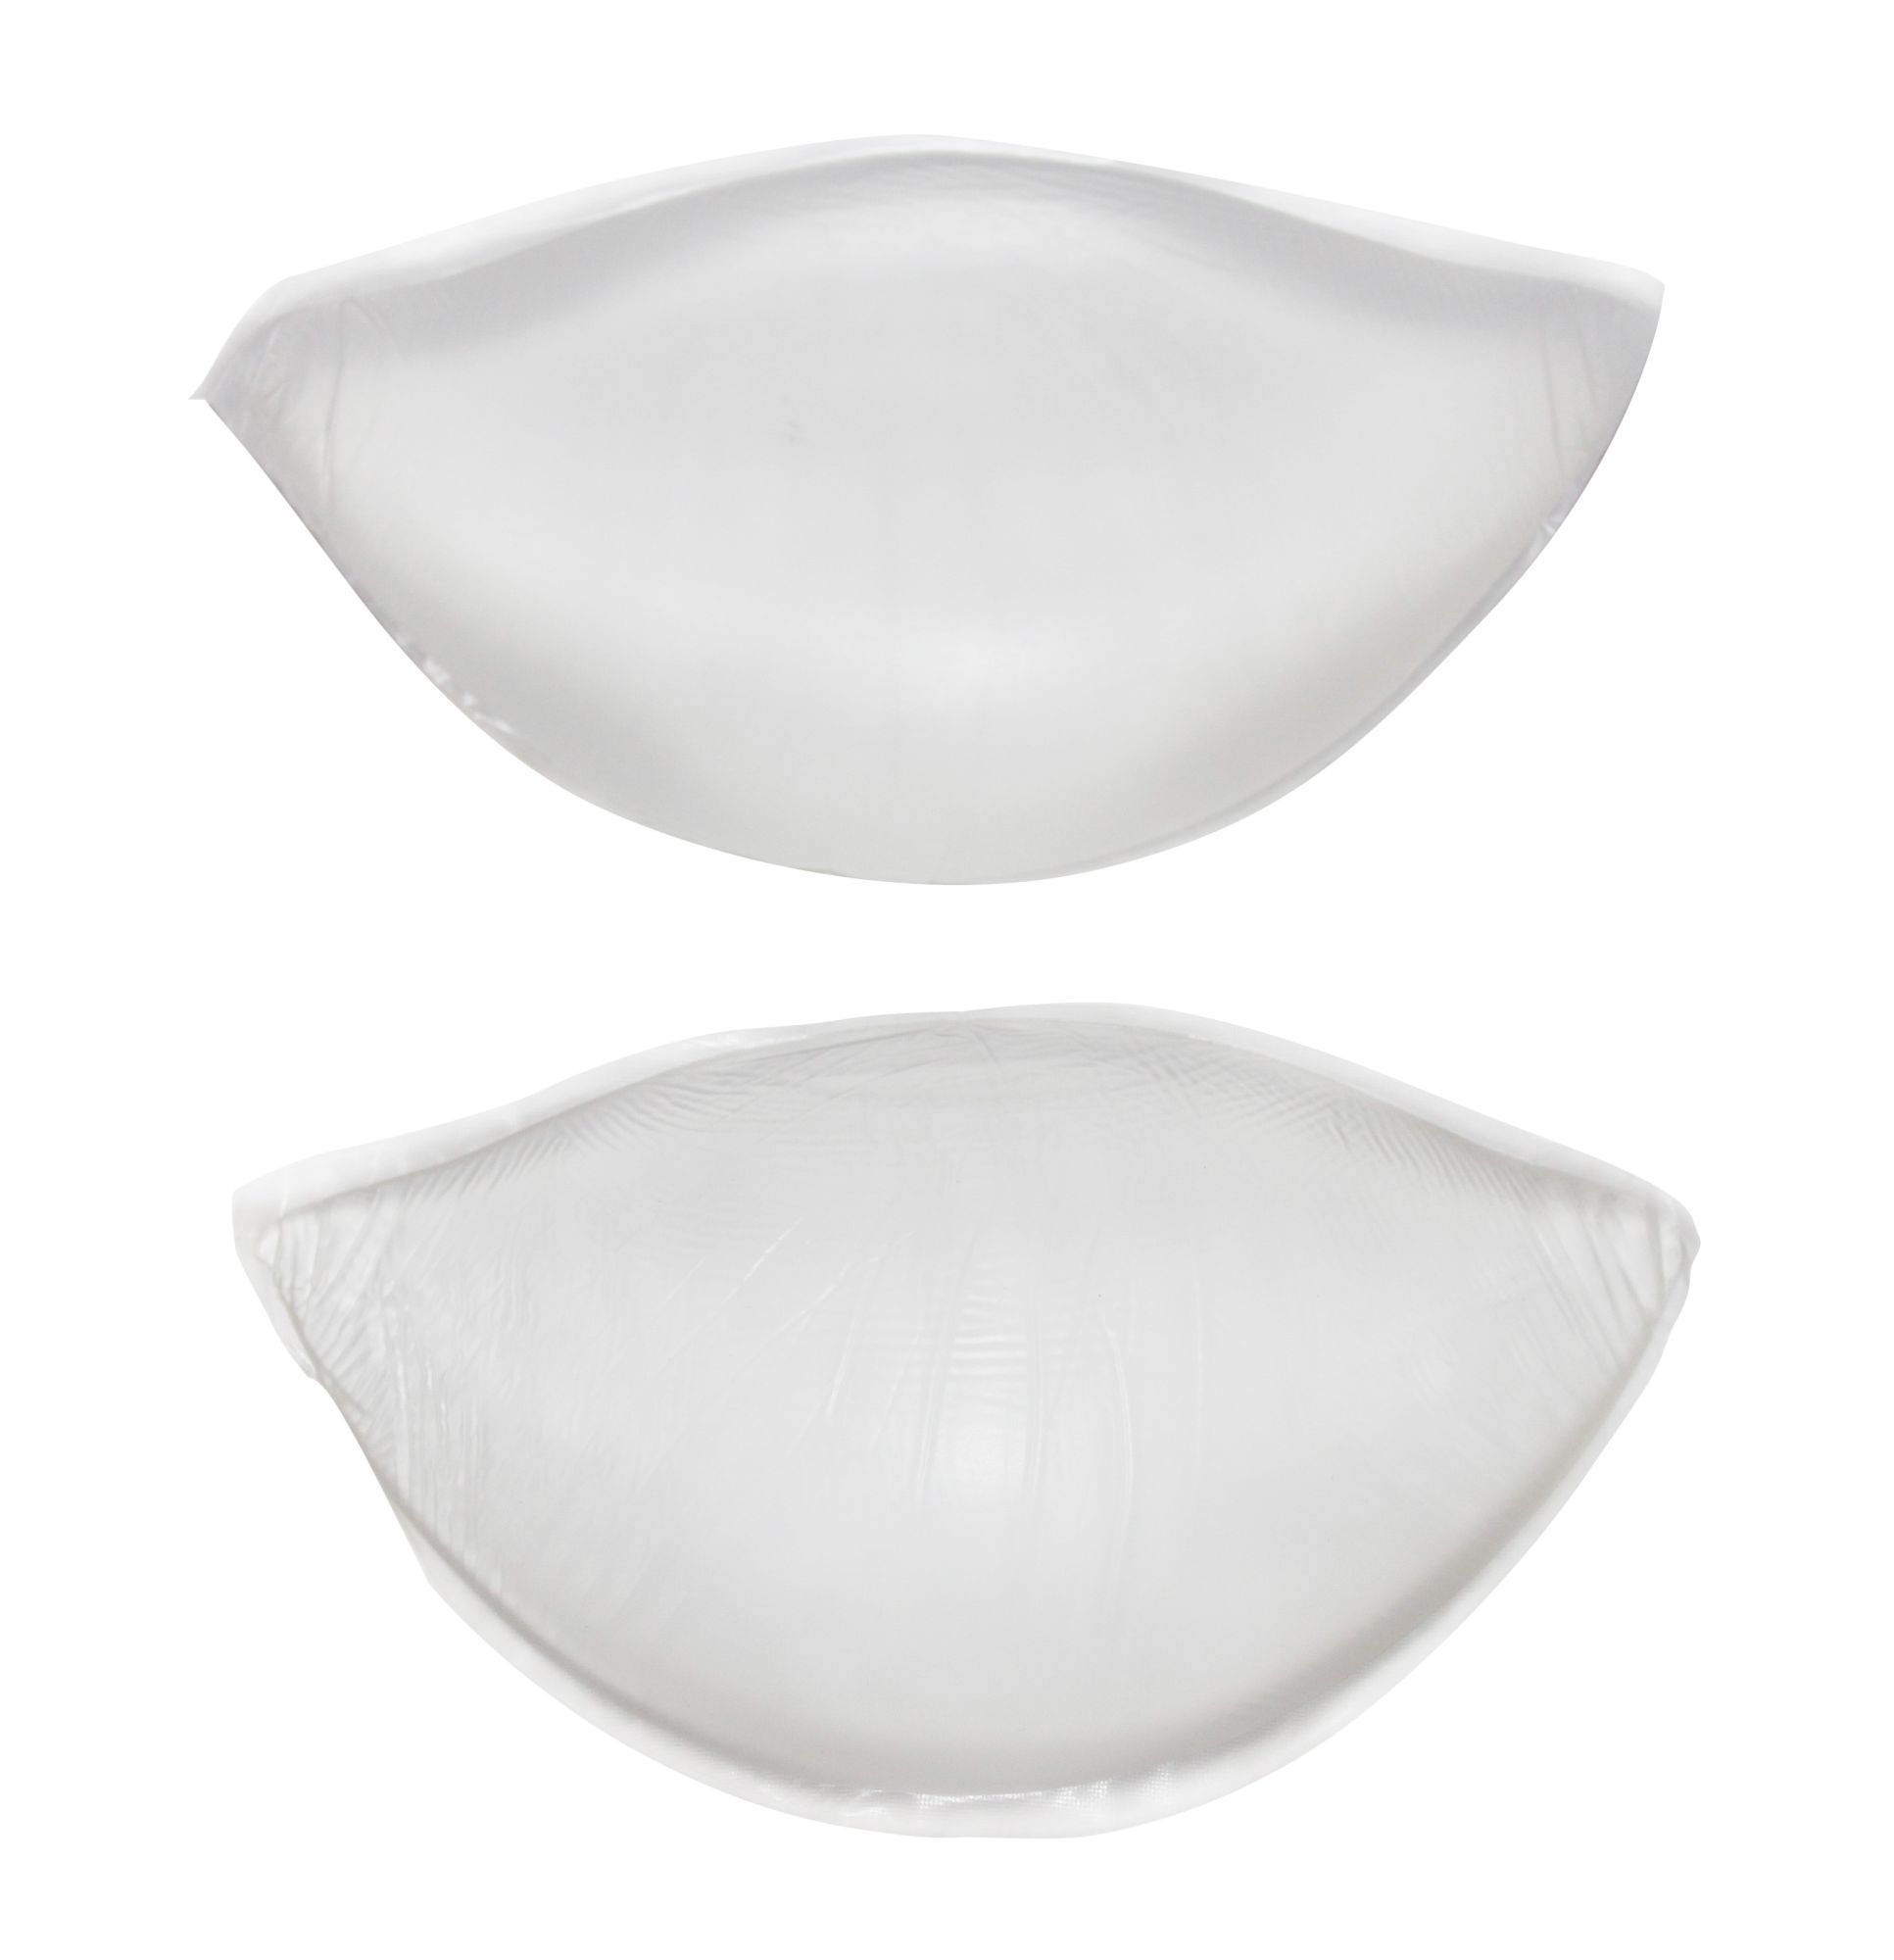 Wholesale chicken fillet silicone bra insert For All Your Intimate Needs 